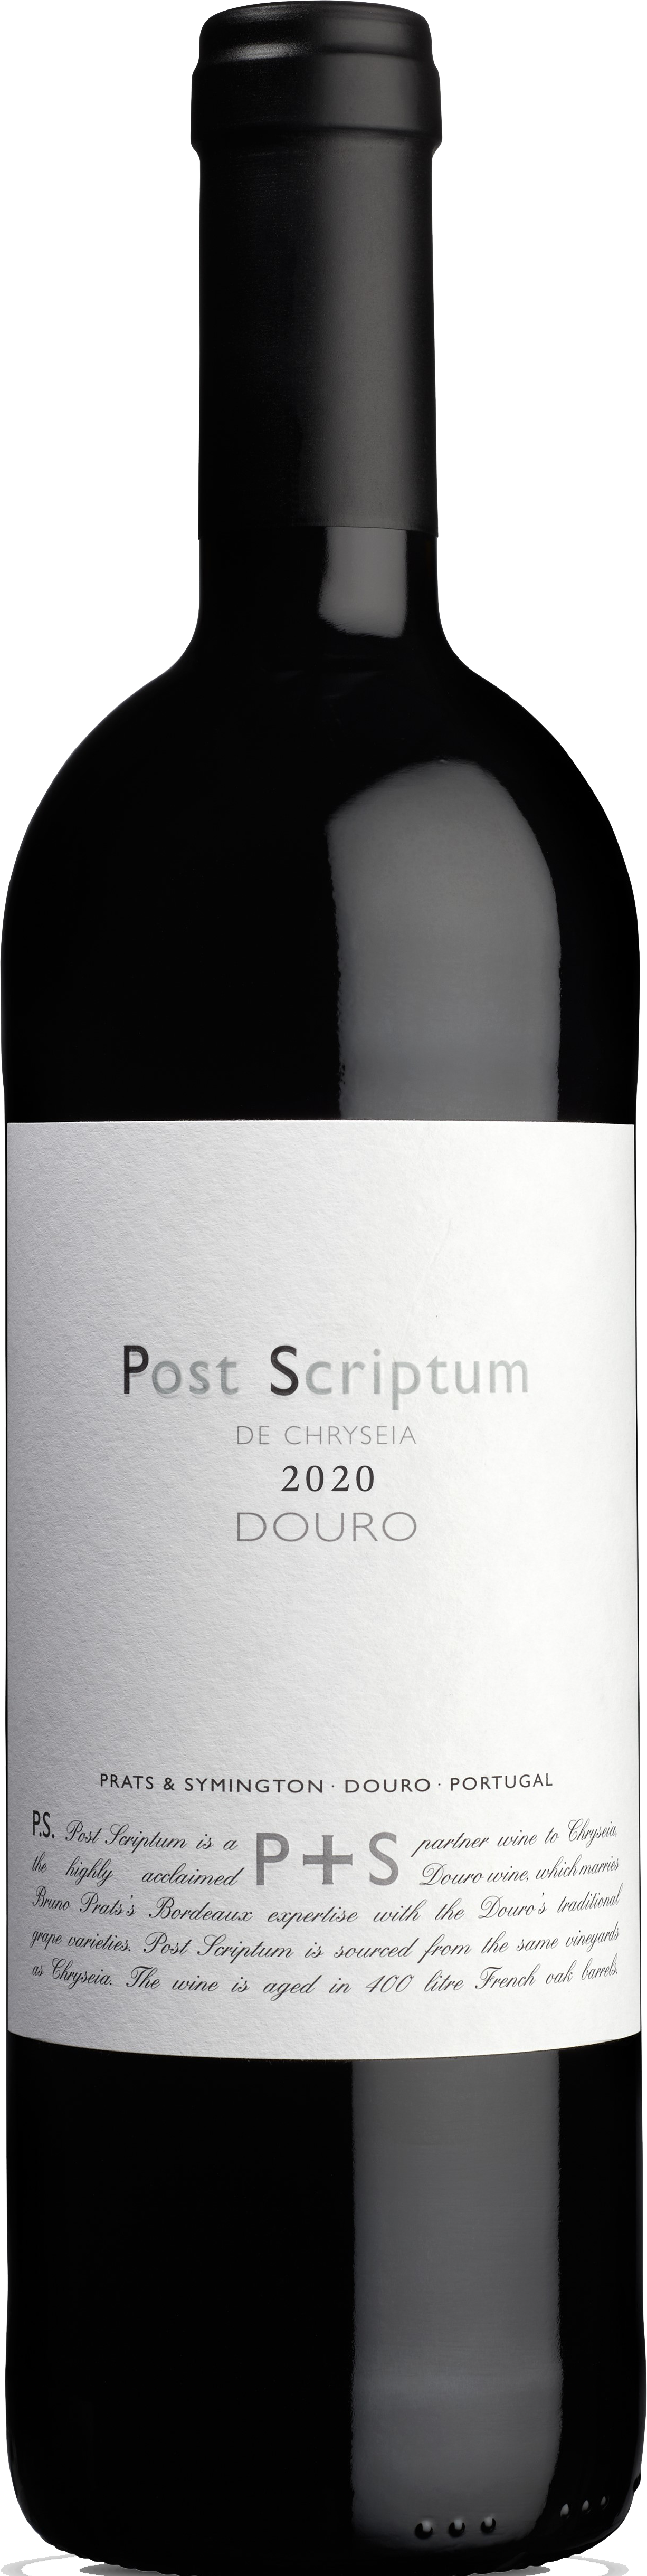 Product Image for P&S POST SCRIPTUM DE CHRYSEIA DOURO RED 2020